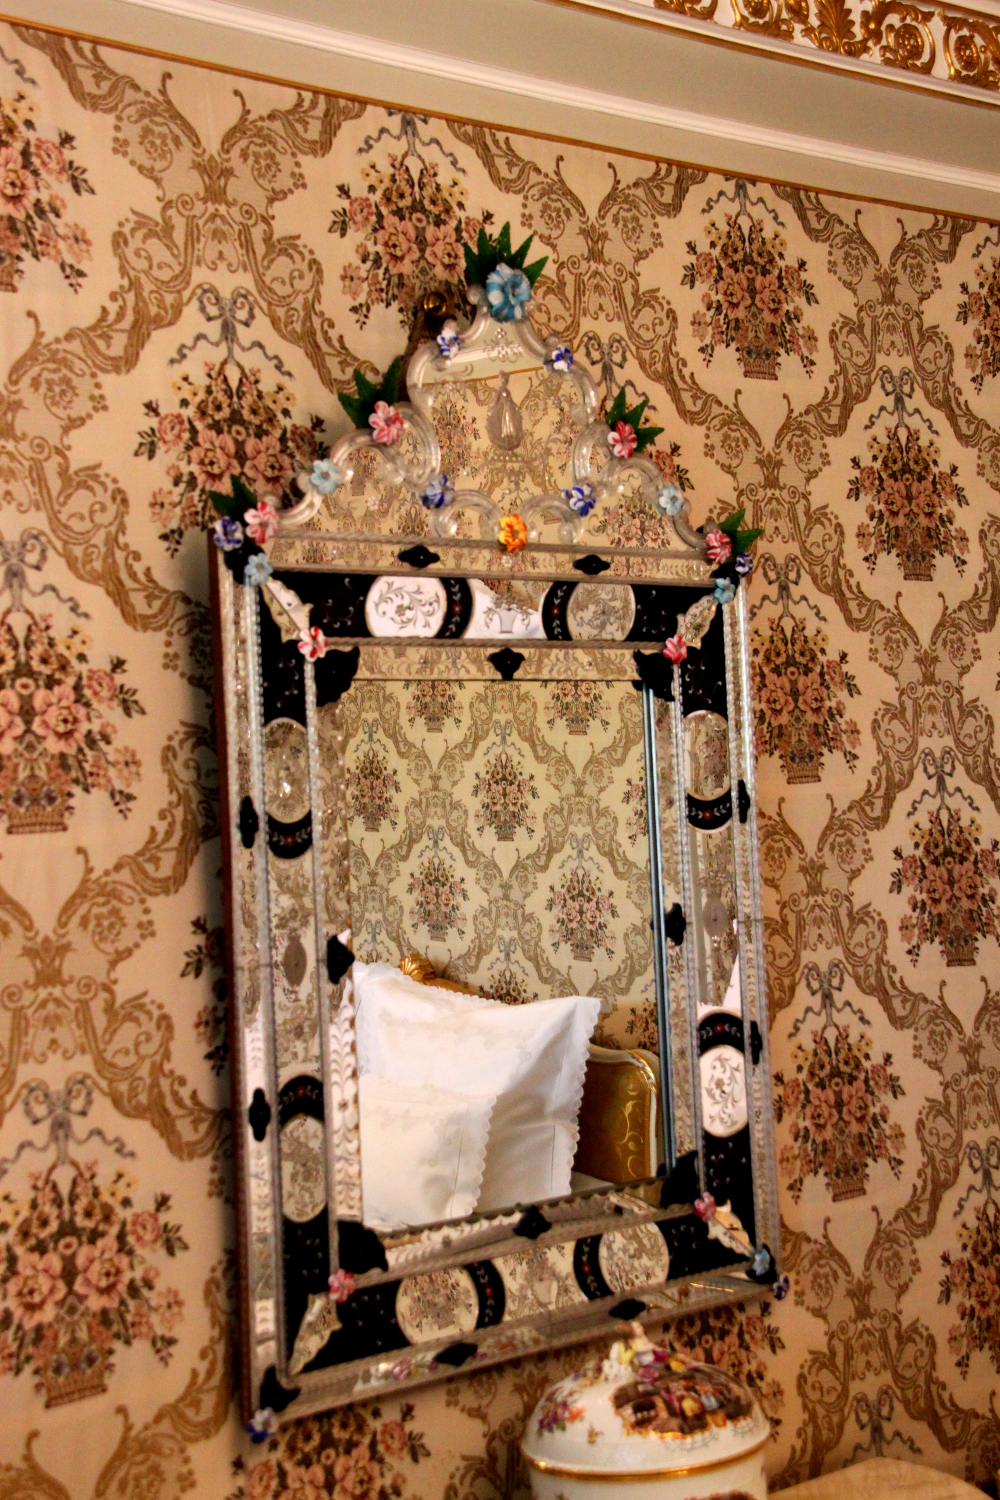 Primaverii (Spring) Palace, Ceausescu’s private residence - Nicolae and Elena Ceausescu's bedroom - Murano glass mirror